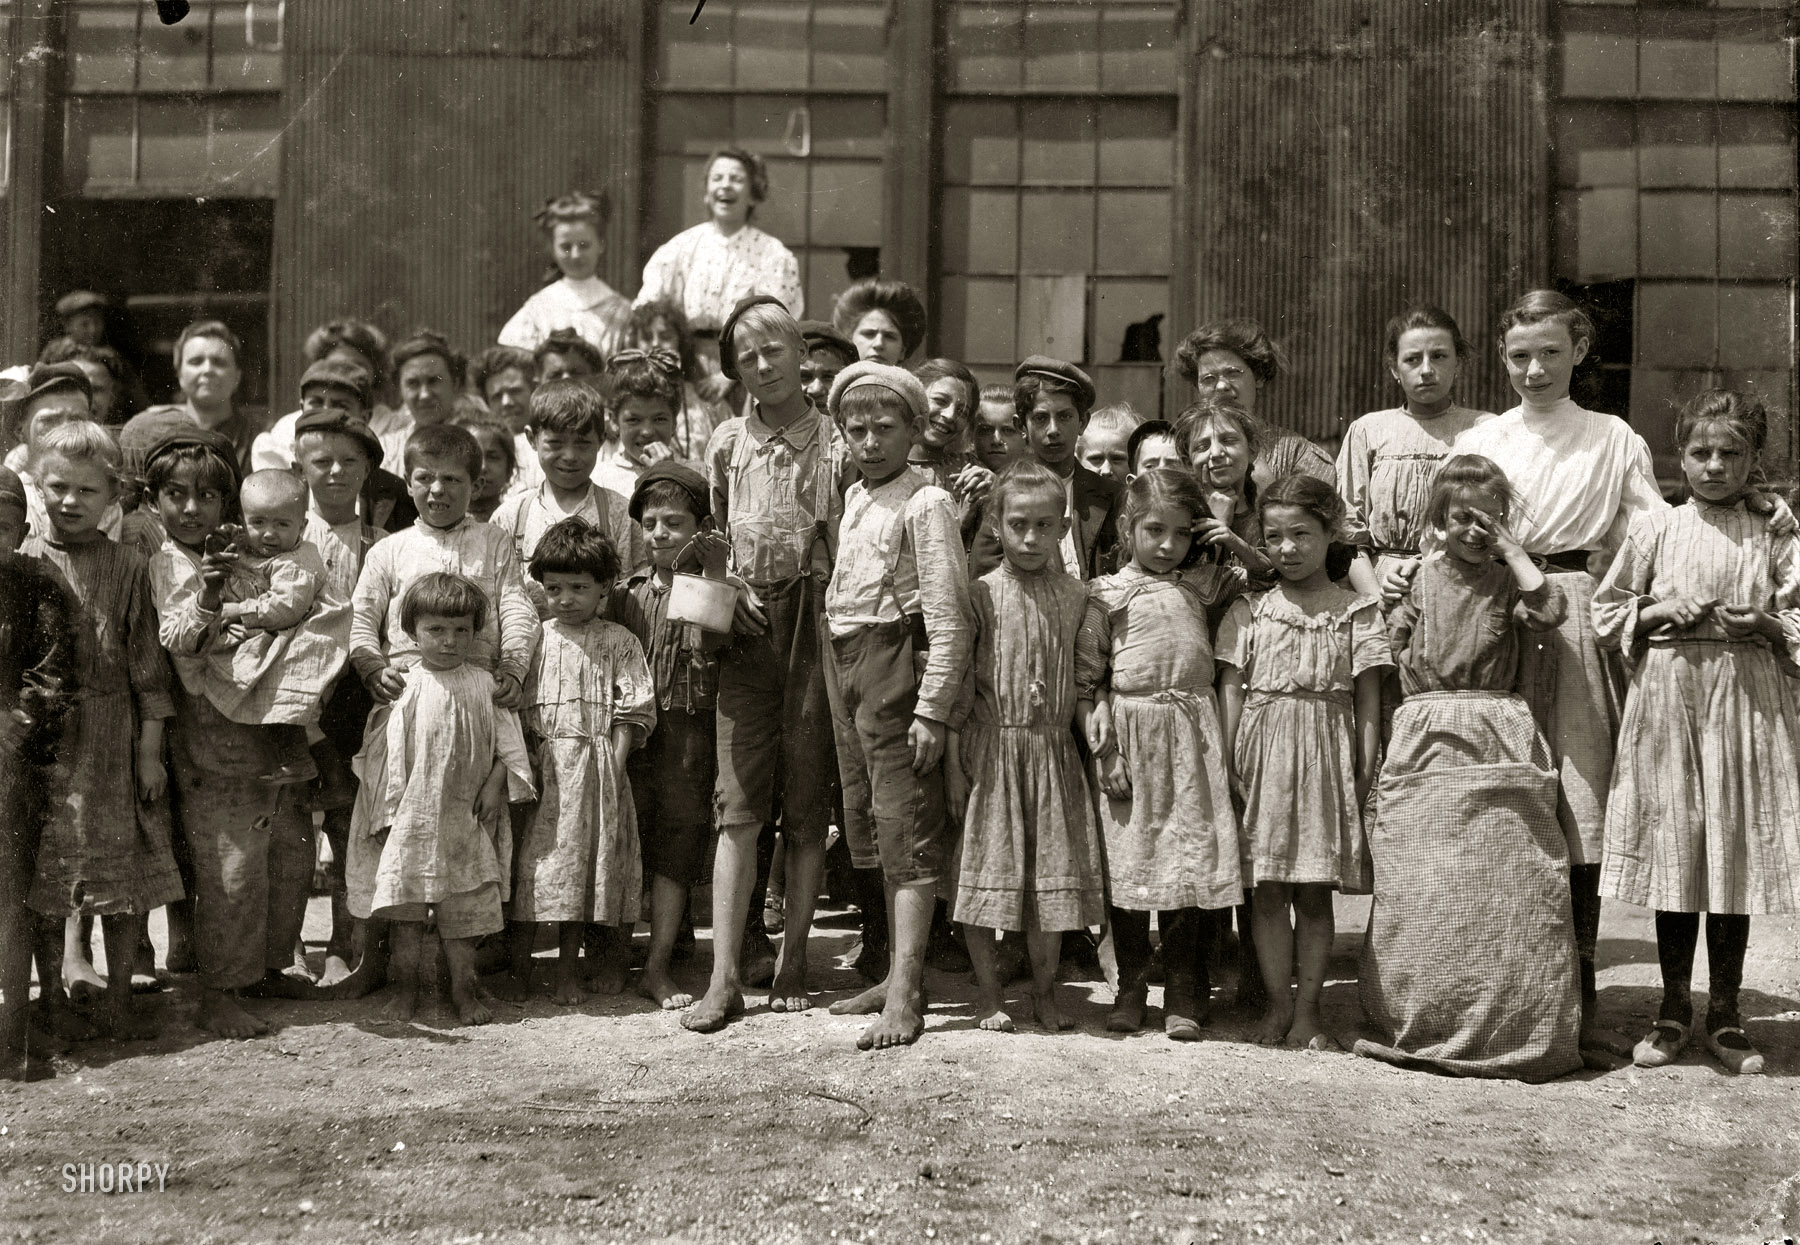 July 1909. "Some of the workers in a Maryland packing company." Photograph by Lewis Wickes Hine. View full size.